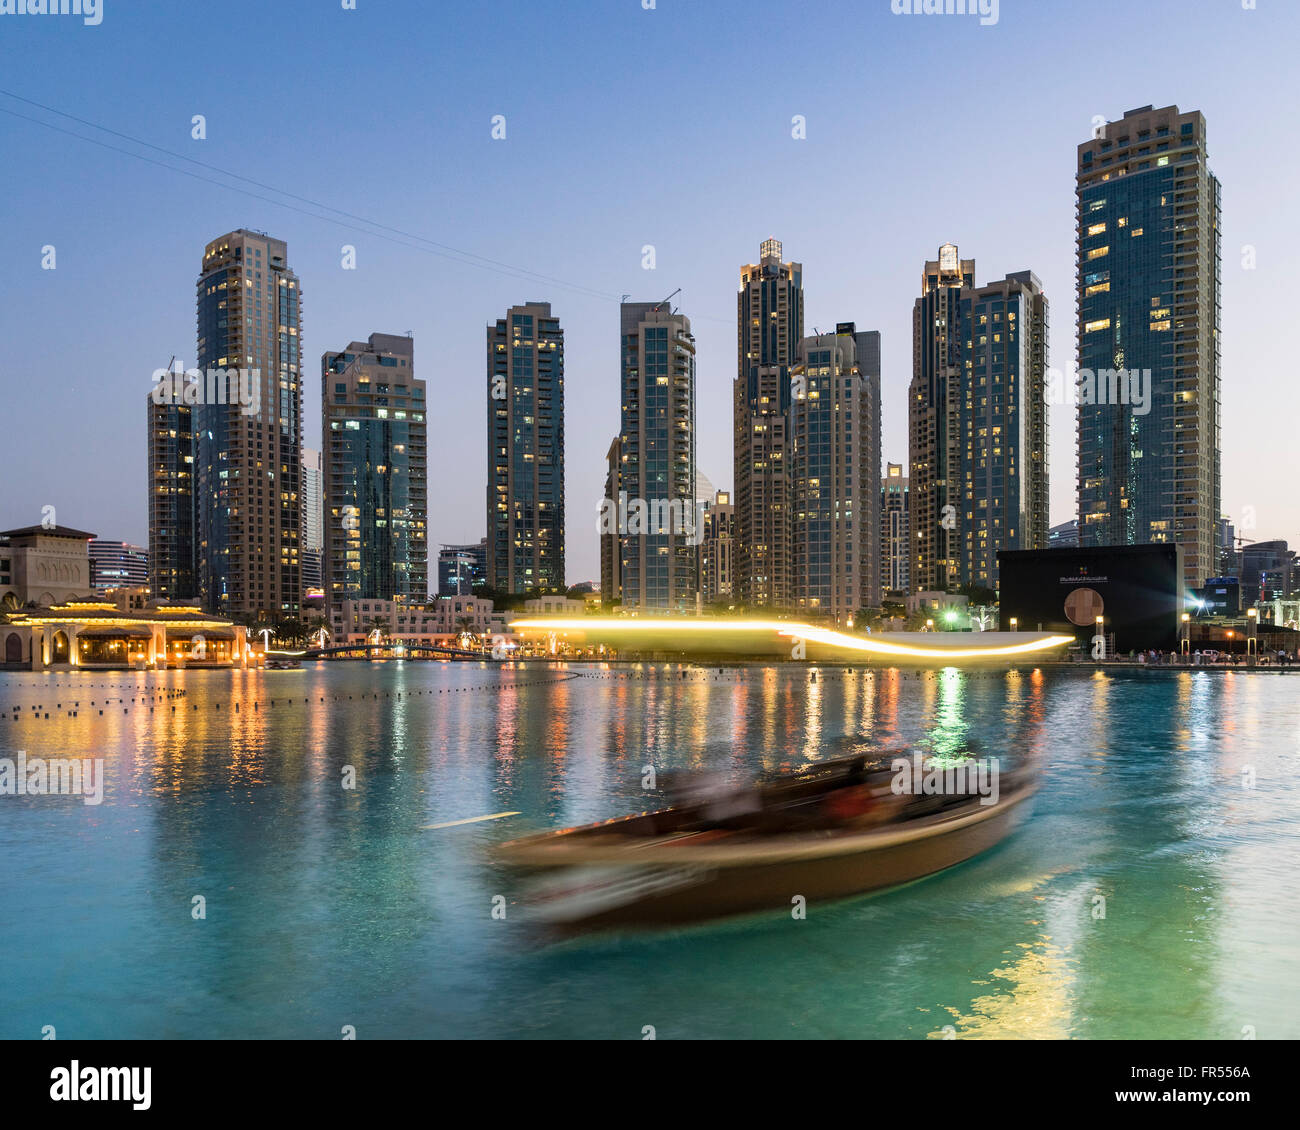 Night view of  luxury apartment towers and tourist boat trip on lake in Downtown Dubai United Arab Emirates Stock Photo